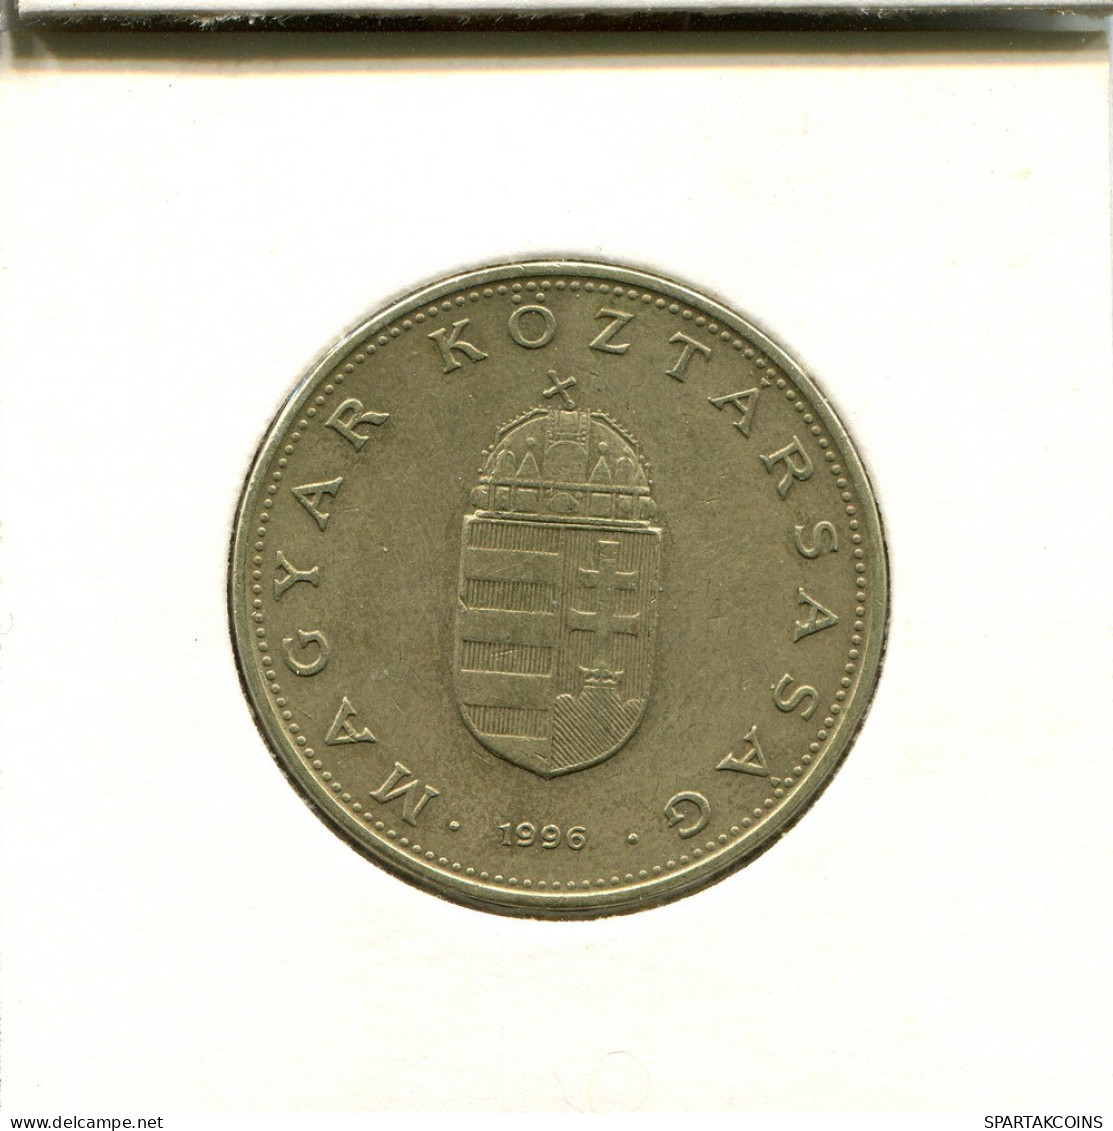 100 FORINT 1996 HUNGARY Coin #AS916.U.A - Ungarn